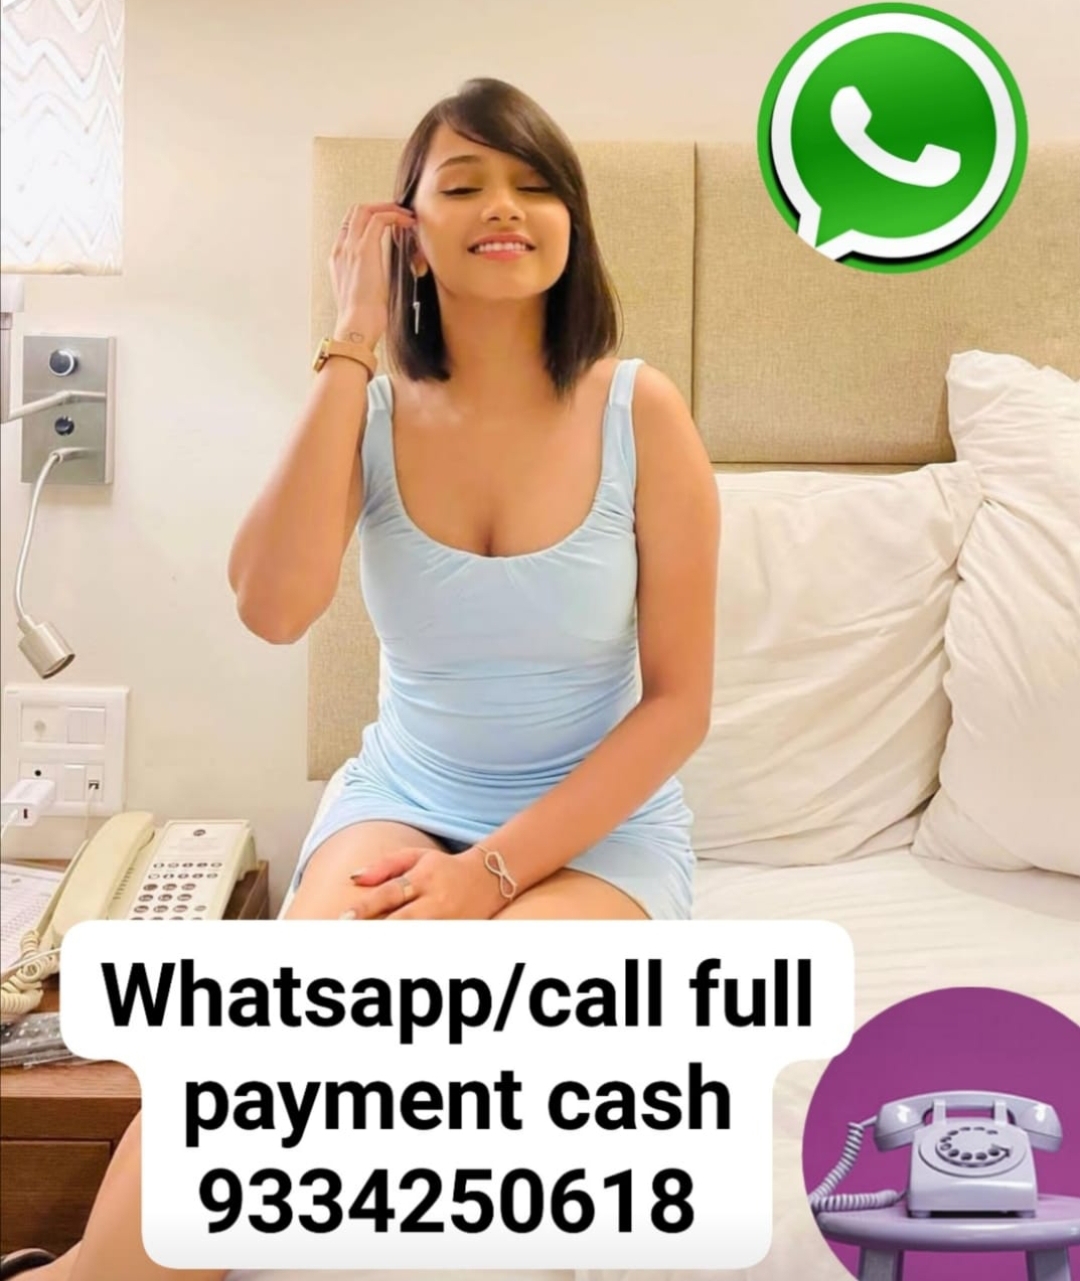 Indore NO ADVANCE✅💵 PAYMENT DIRECT HAND TO HAND FULL PAYMENT CAS